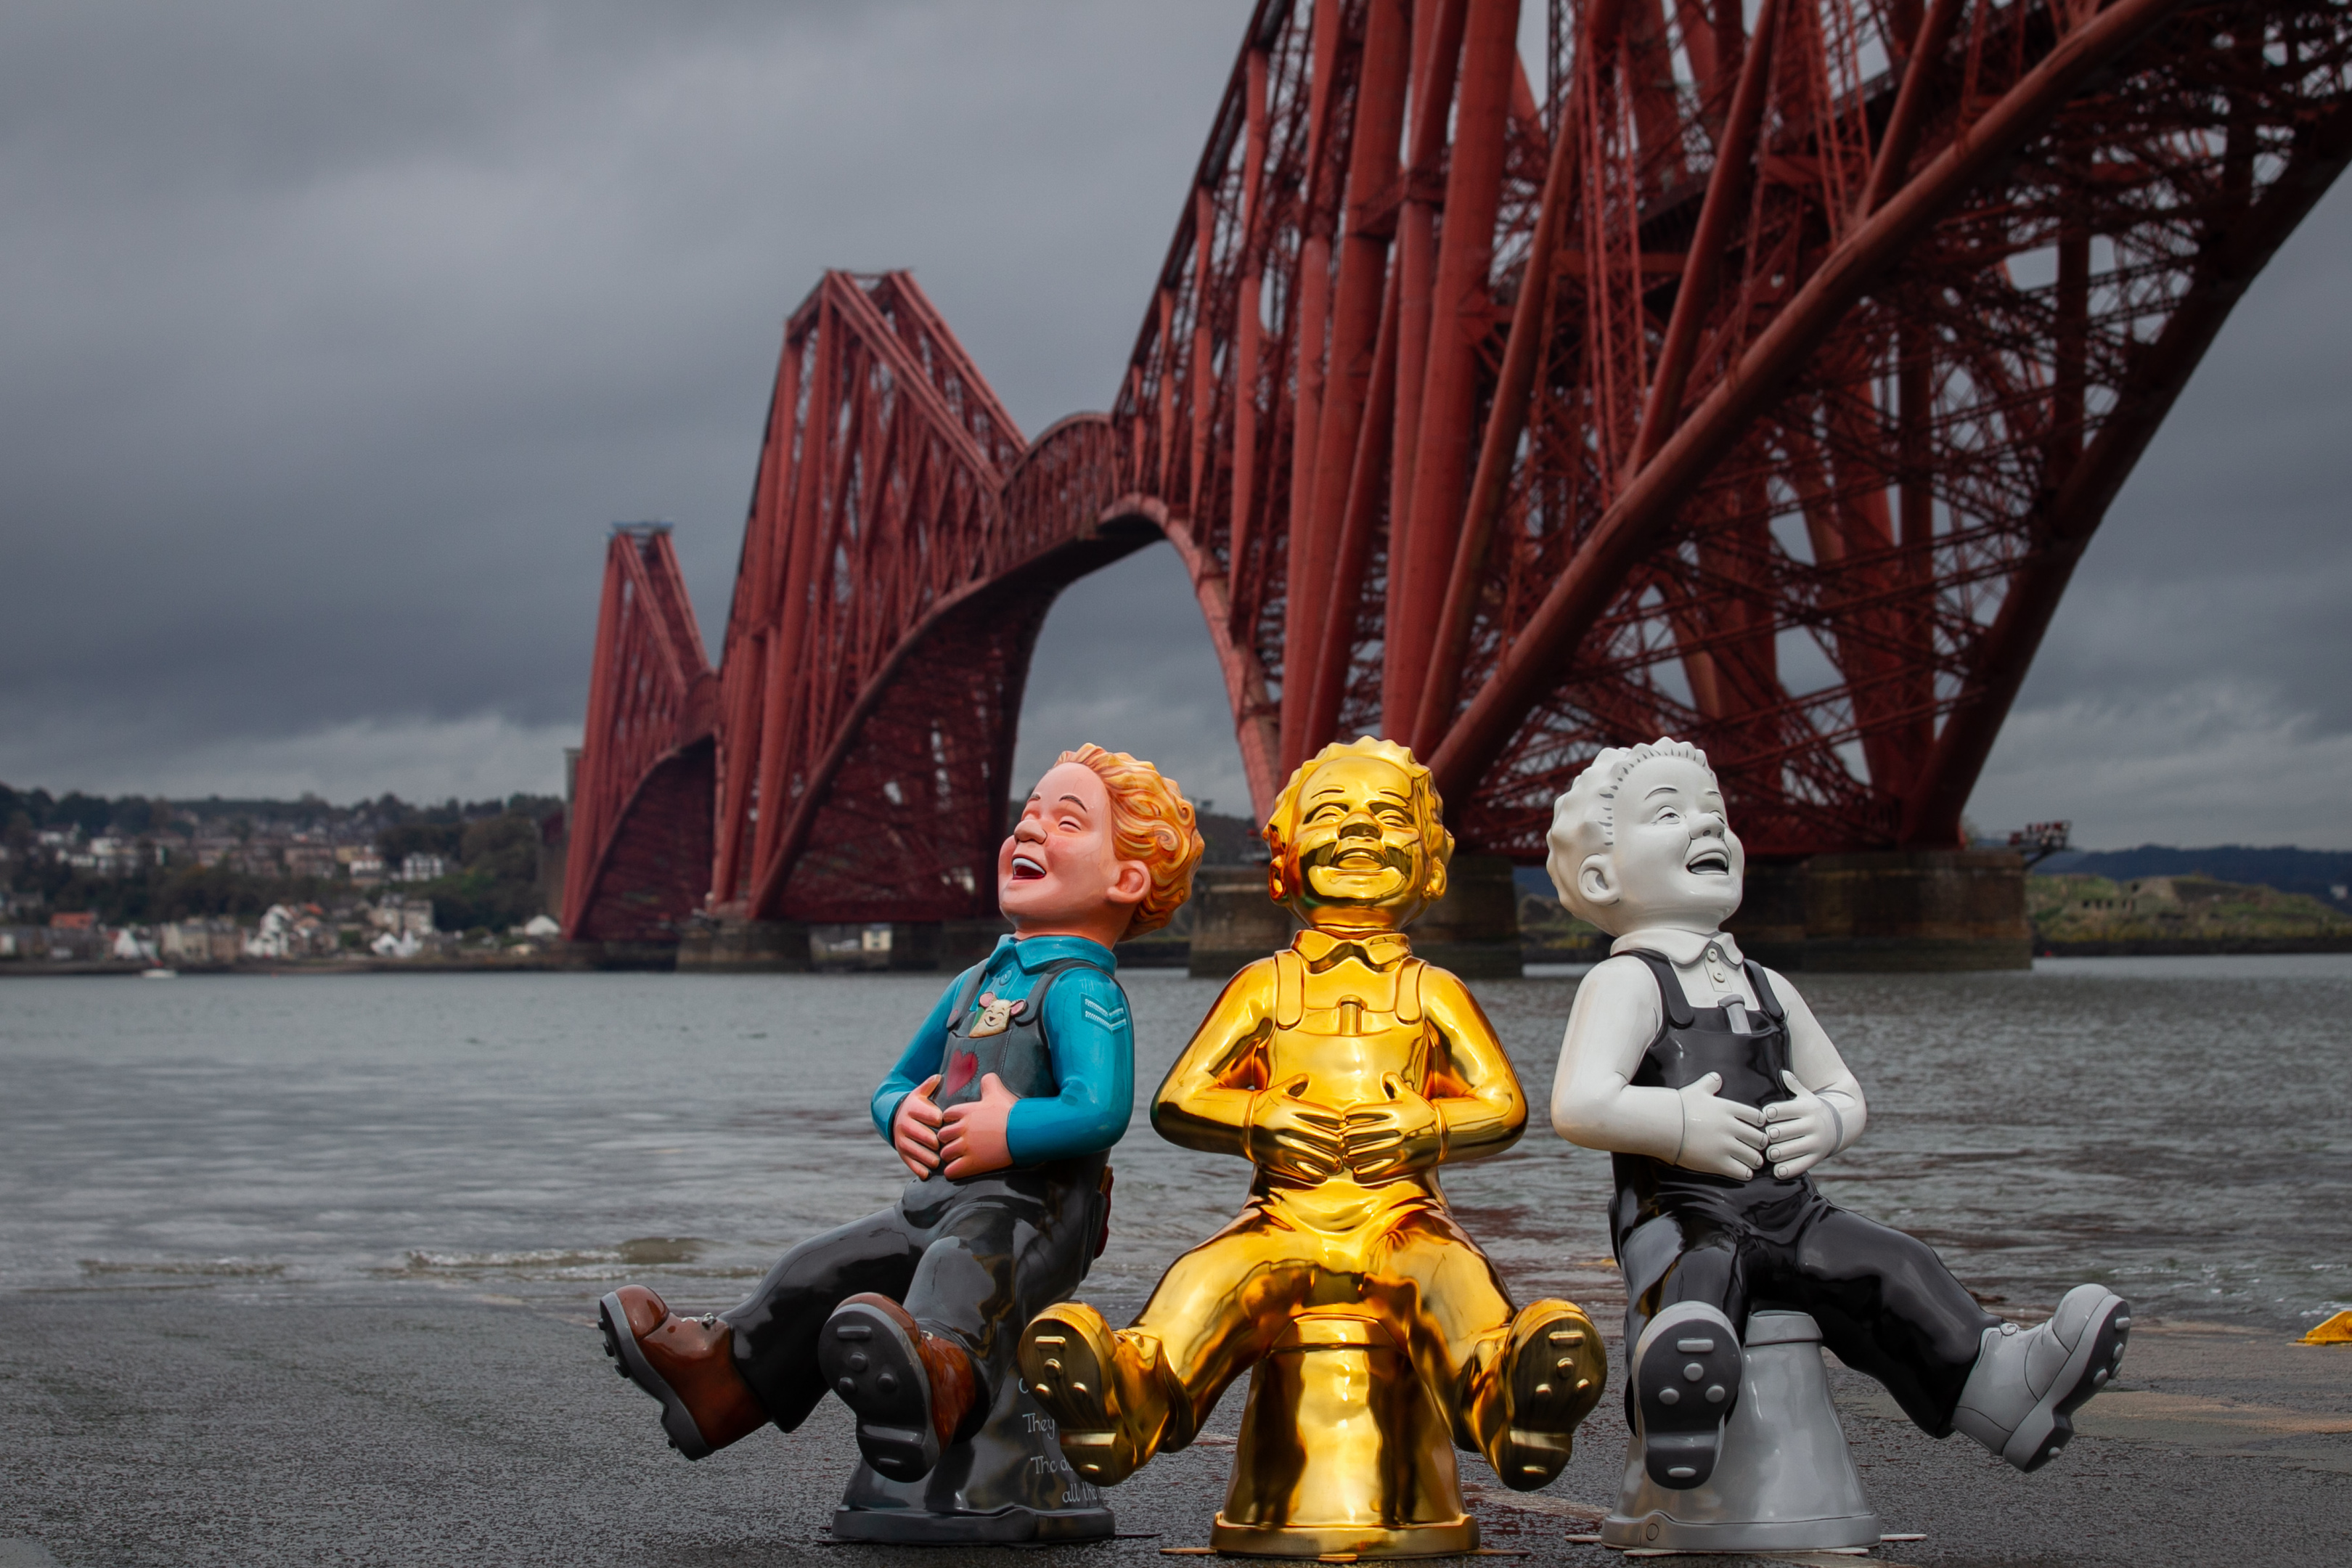 Oor Wullie Bucket Trail statues will come to various locations in Glasgow and Edinburgh. (Andrew Cawley)